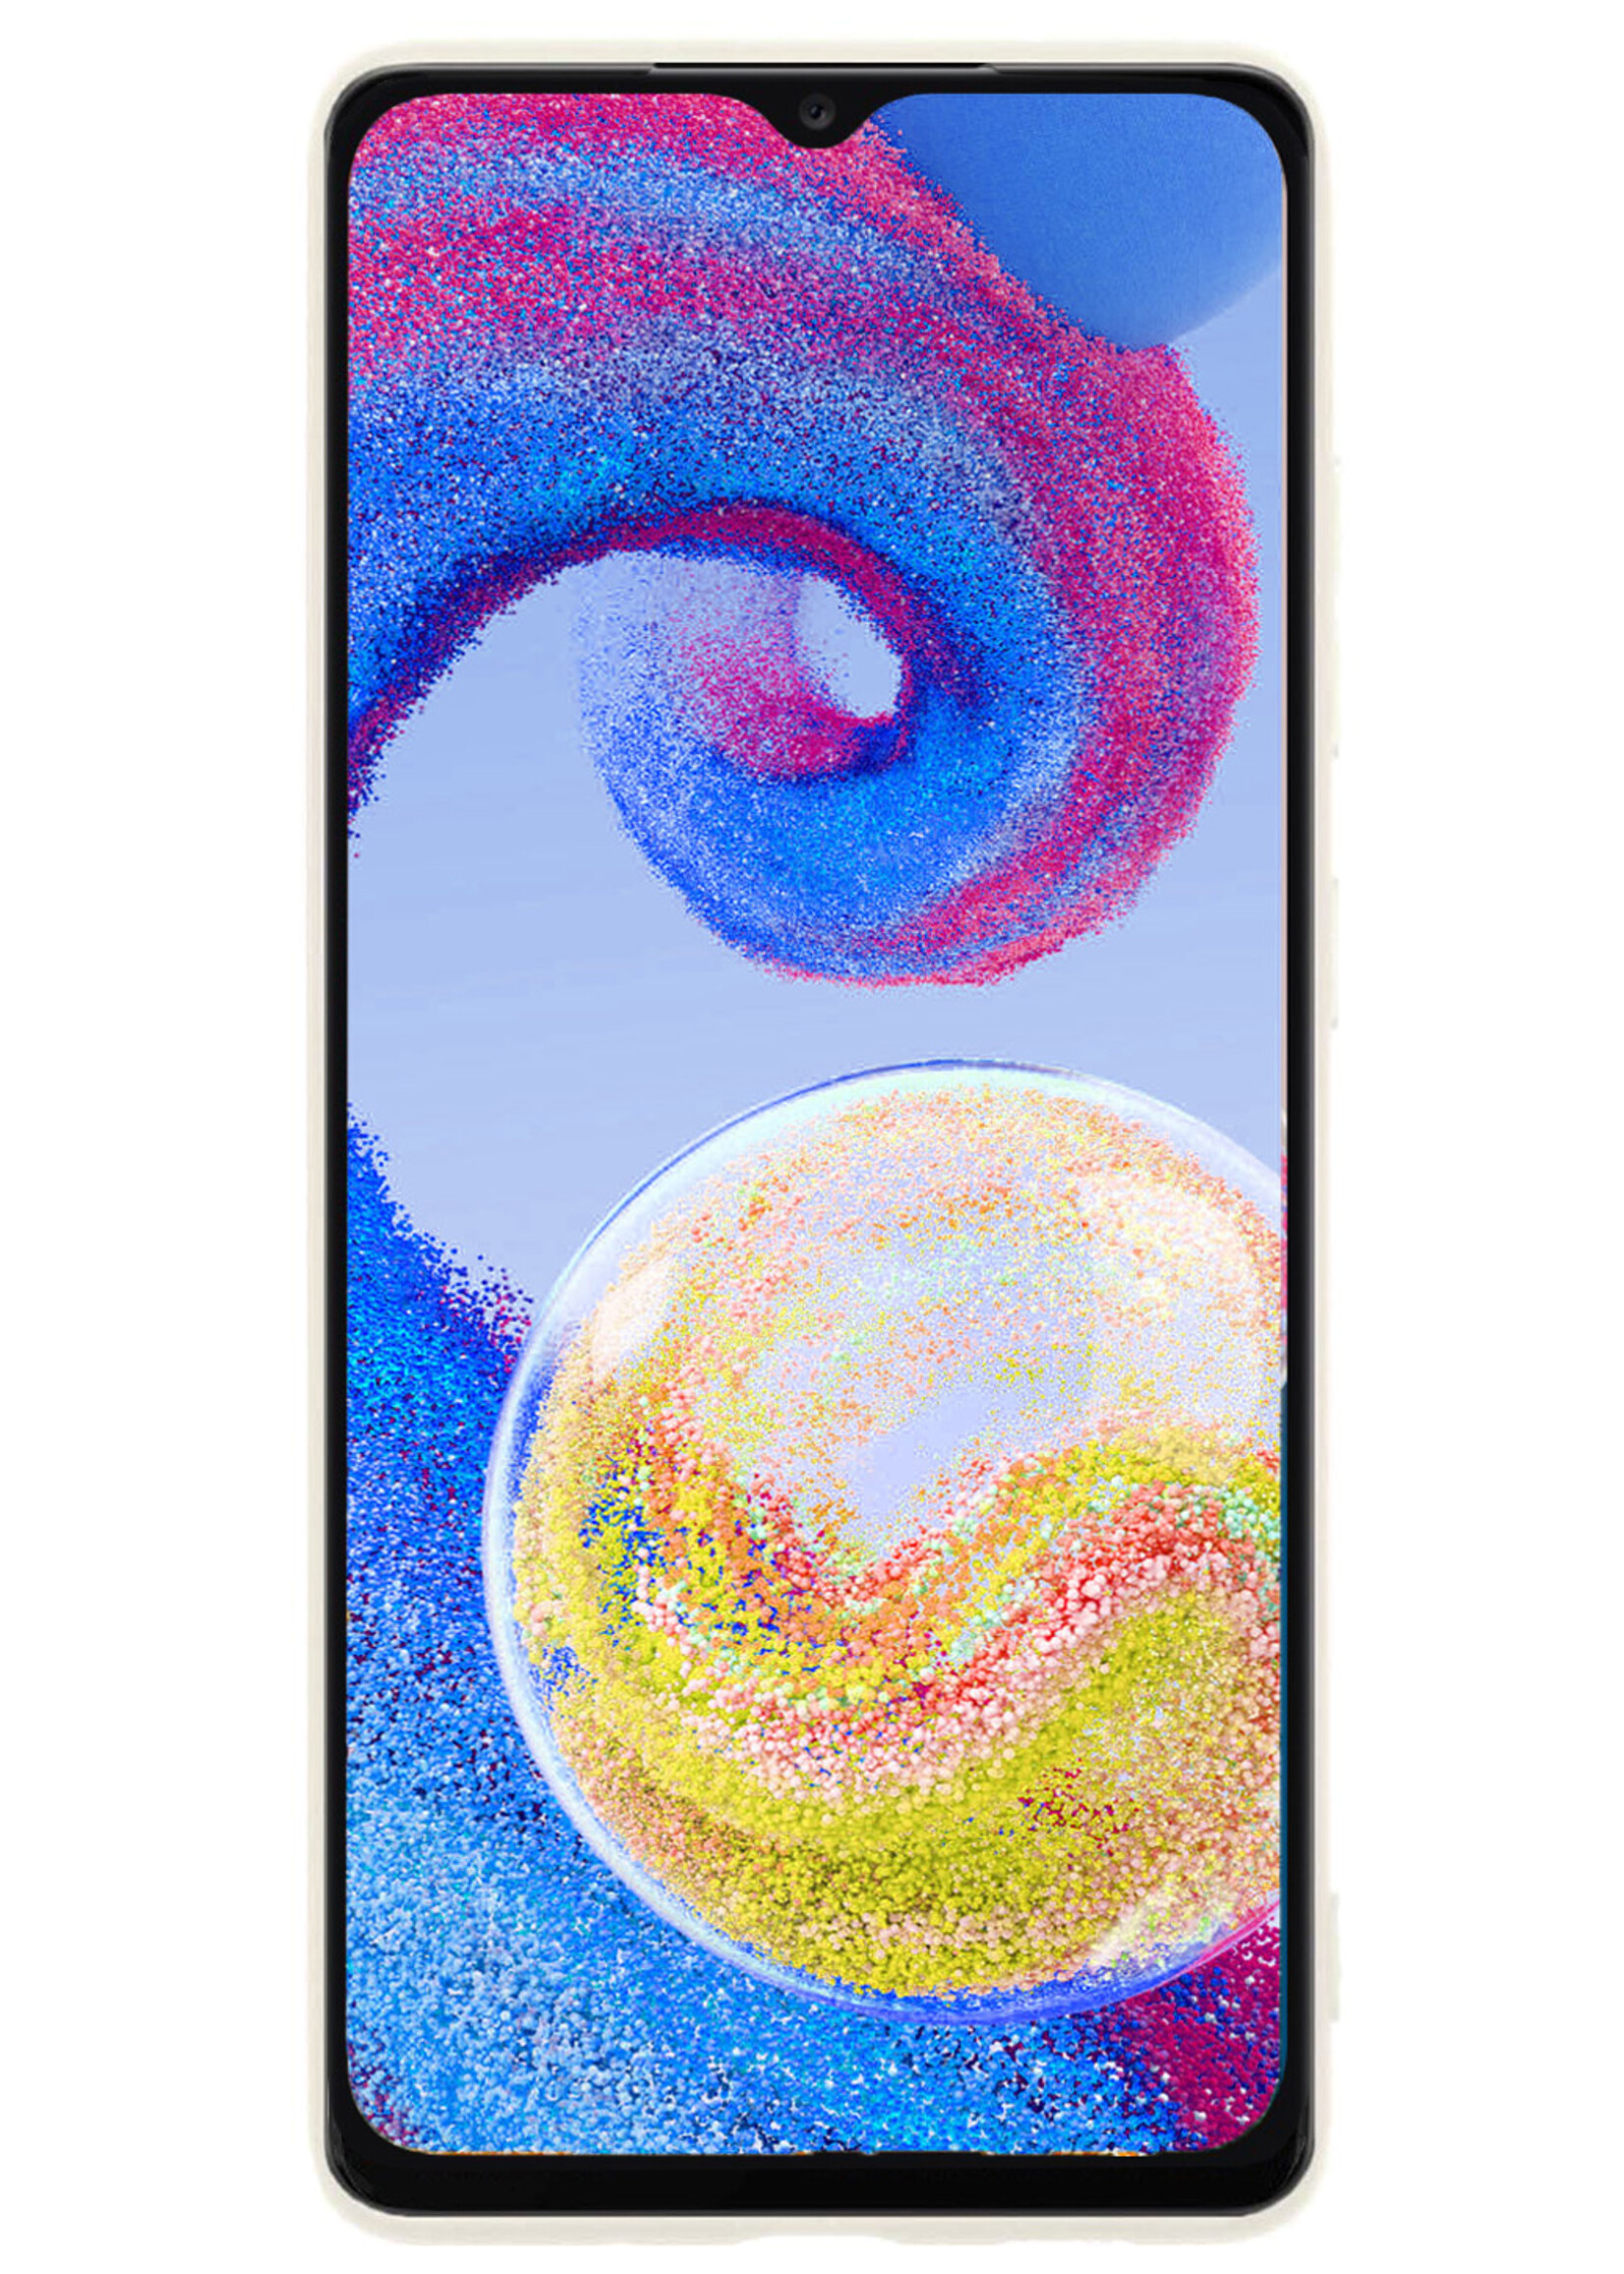 BTH Hoesje Geschikt voor Samsung A04s Hoesje Siliconen Case Hoes - Hoes Geschikt voor Samsung Galaxy A04s Hoes Cover Case - Wit - 2 PACK